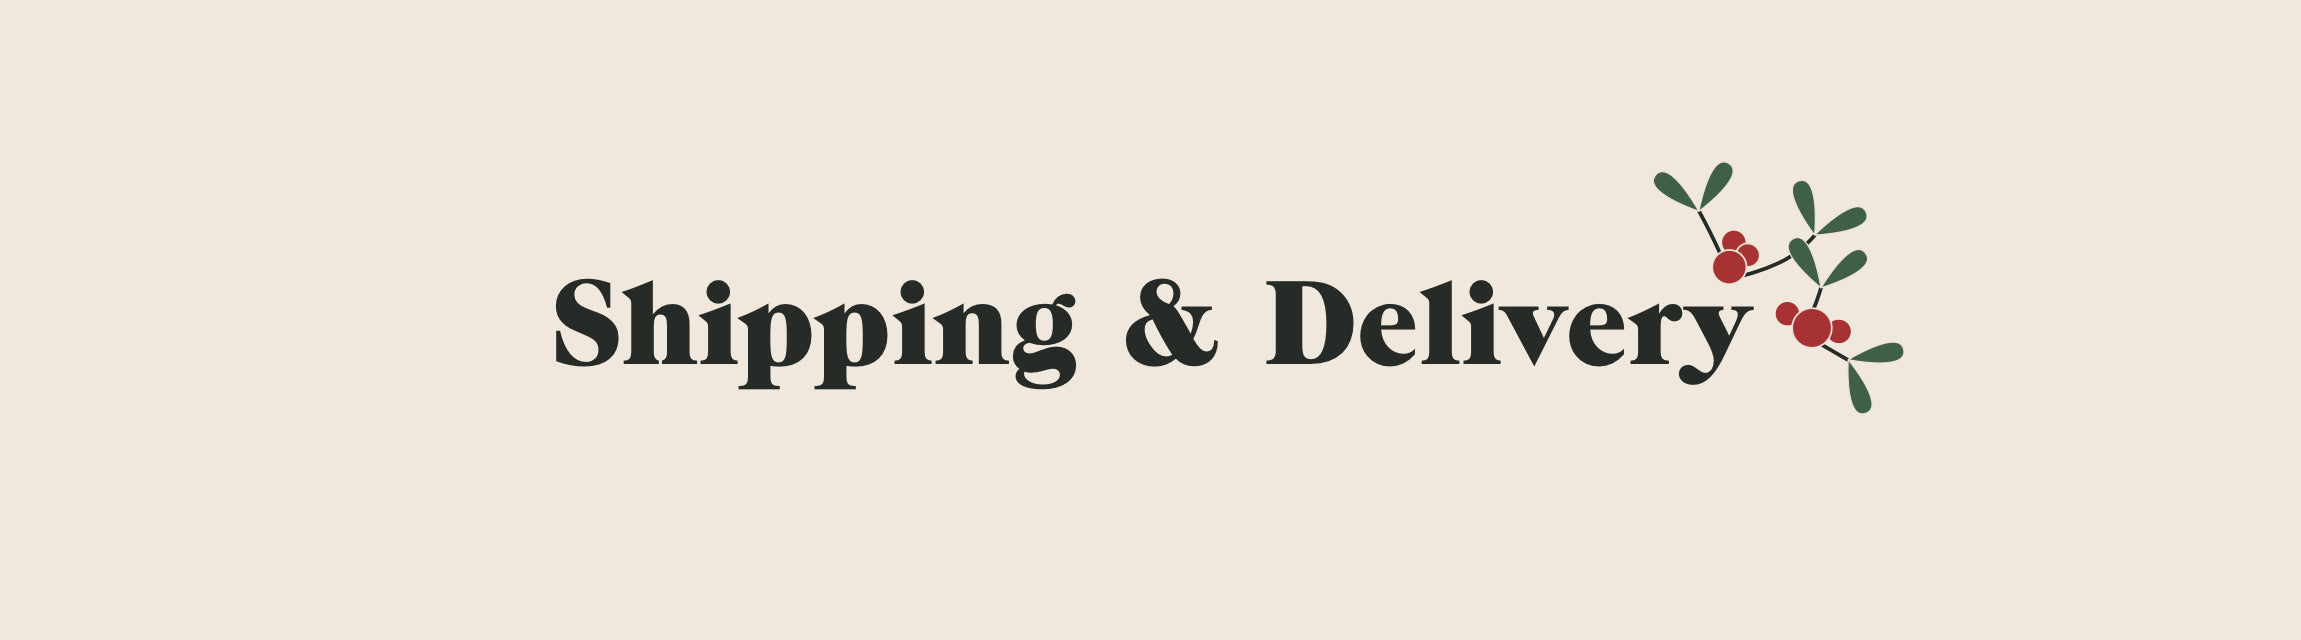 Shipping & Delivery title with mistletoe icon